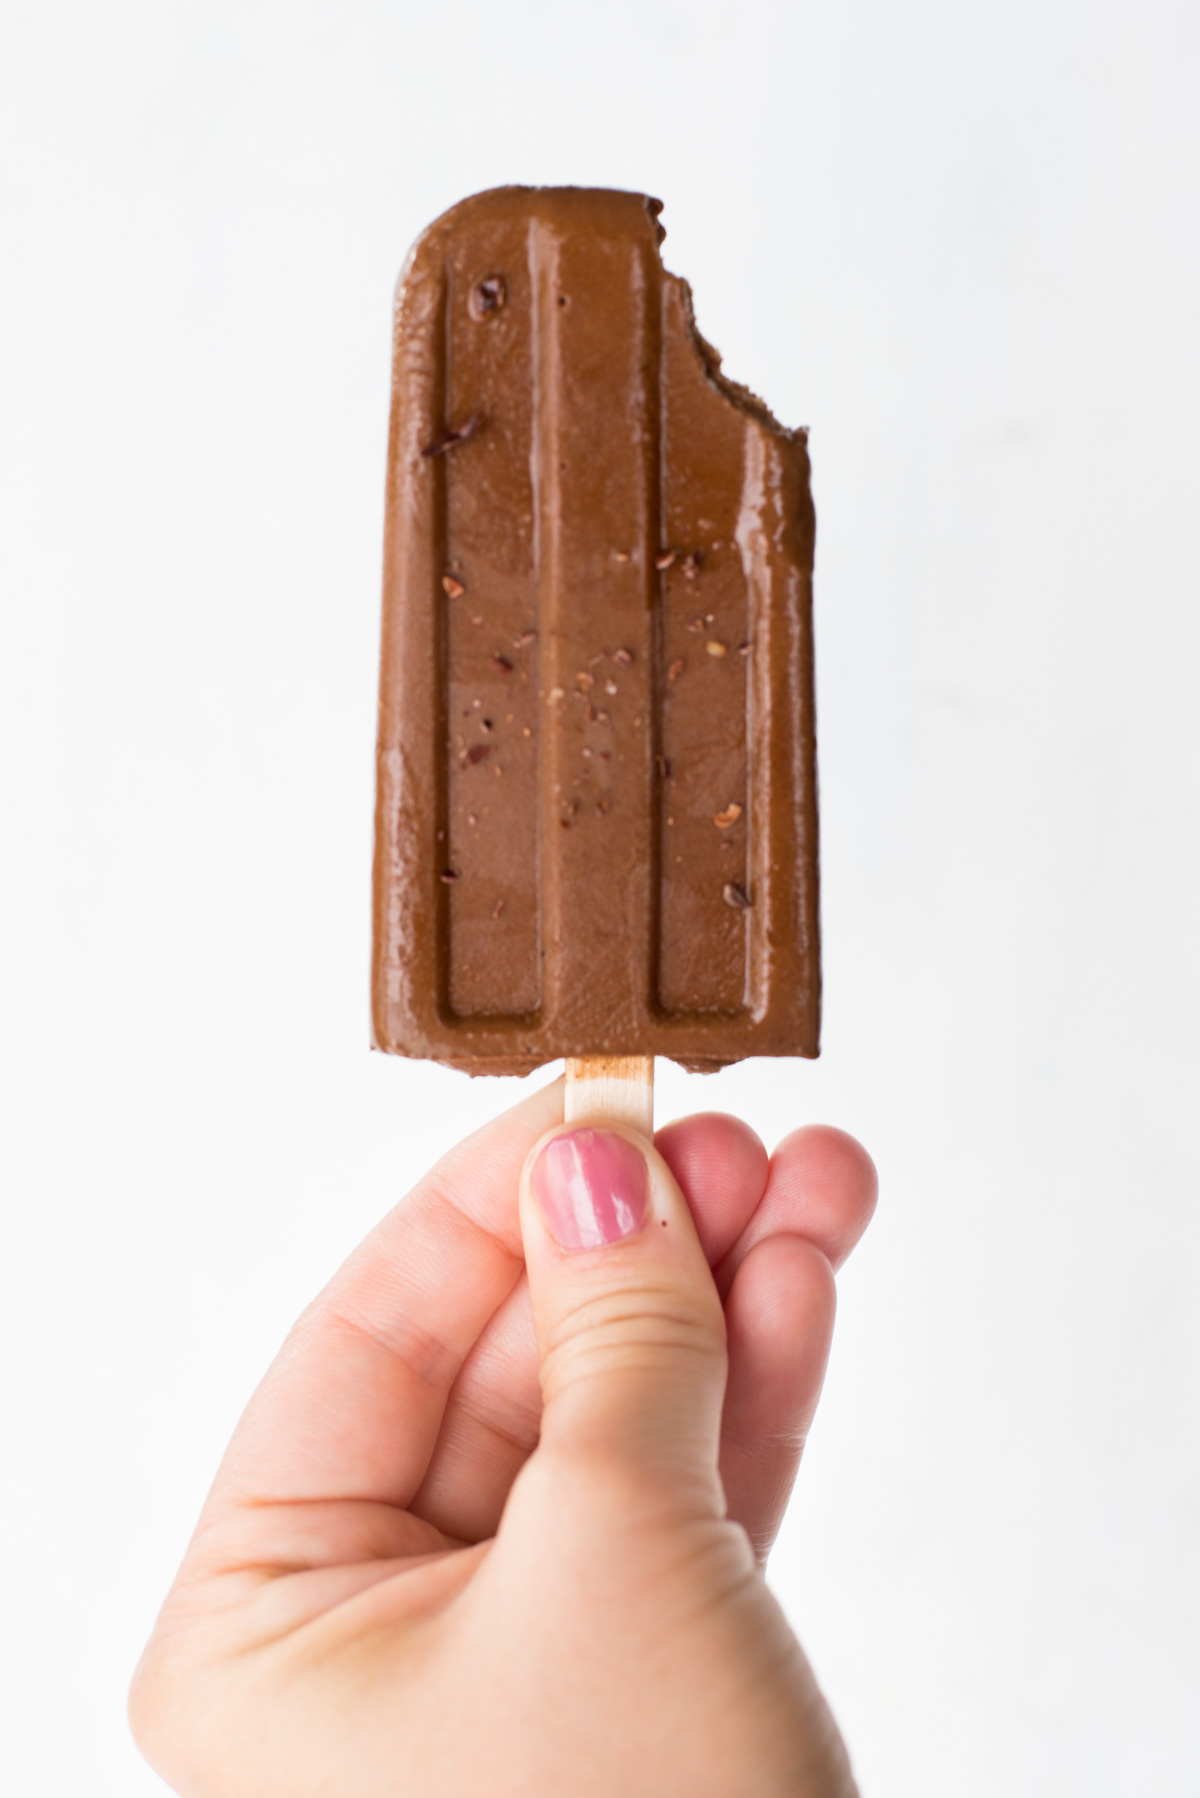 Fudgesicles loaded with hormonal balancing vital nutrients that will end all cravings.